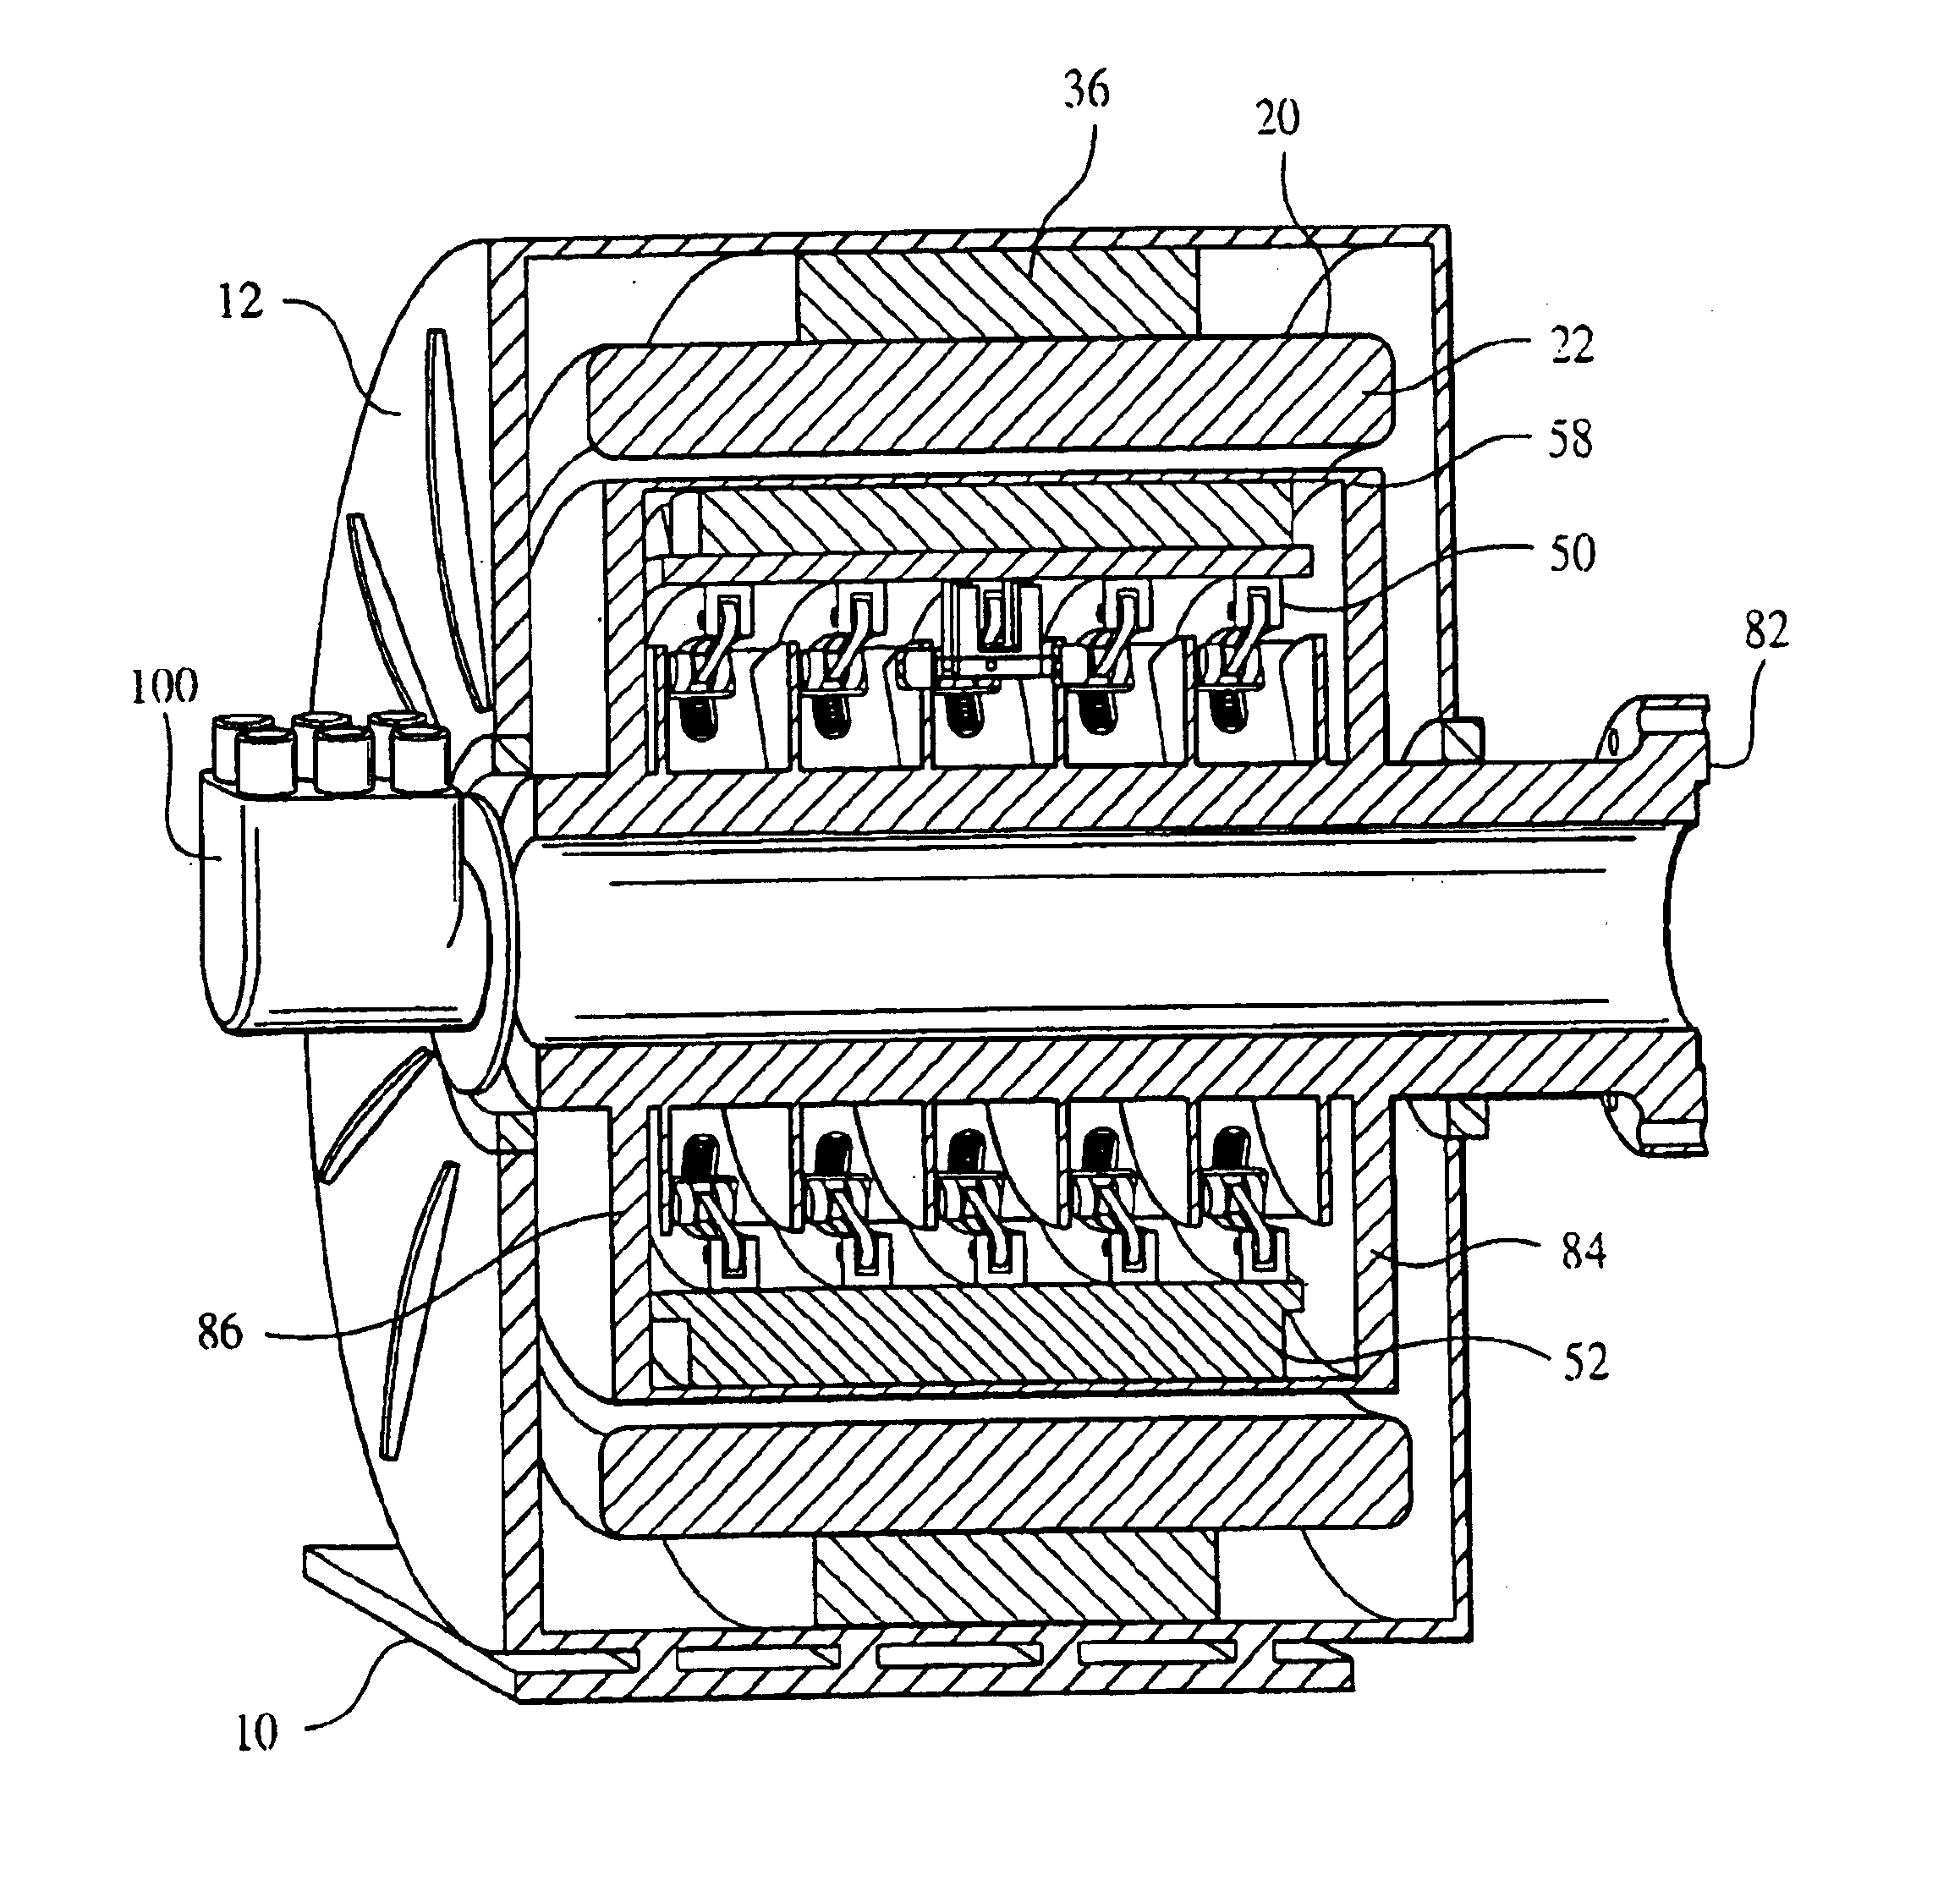 Stator coil assembly for superconducting rotating machines